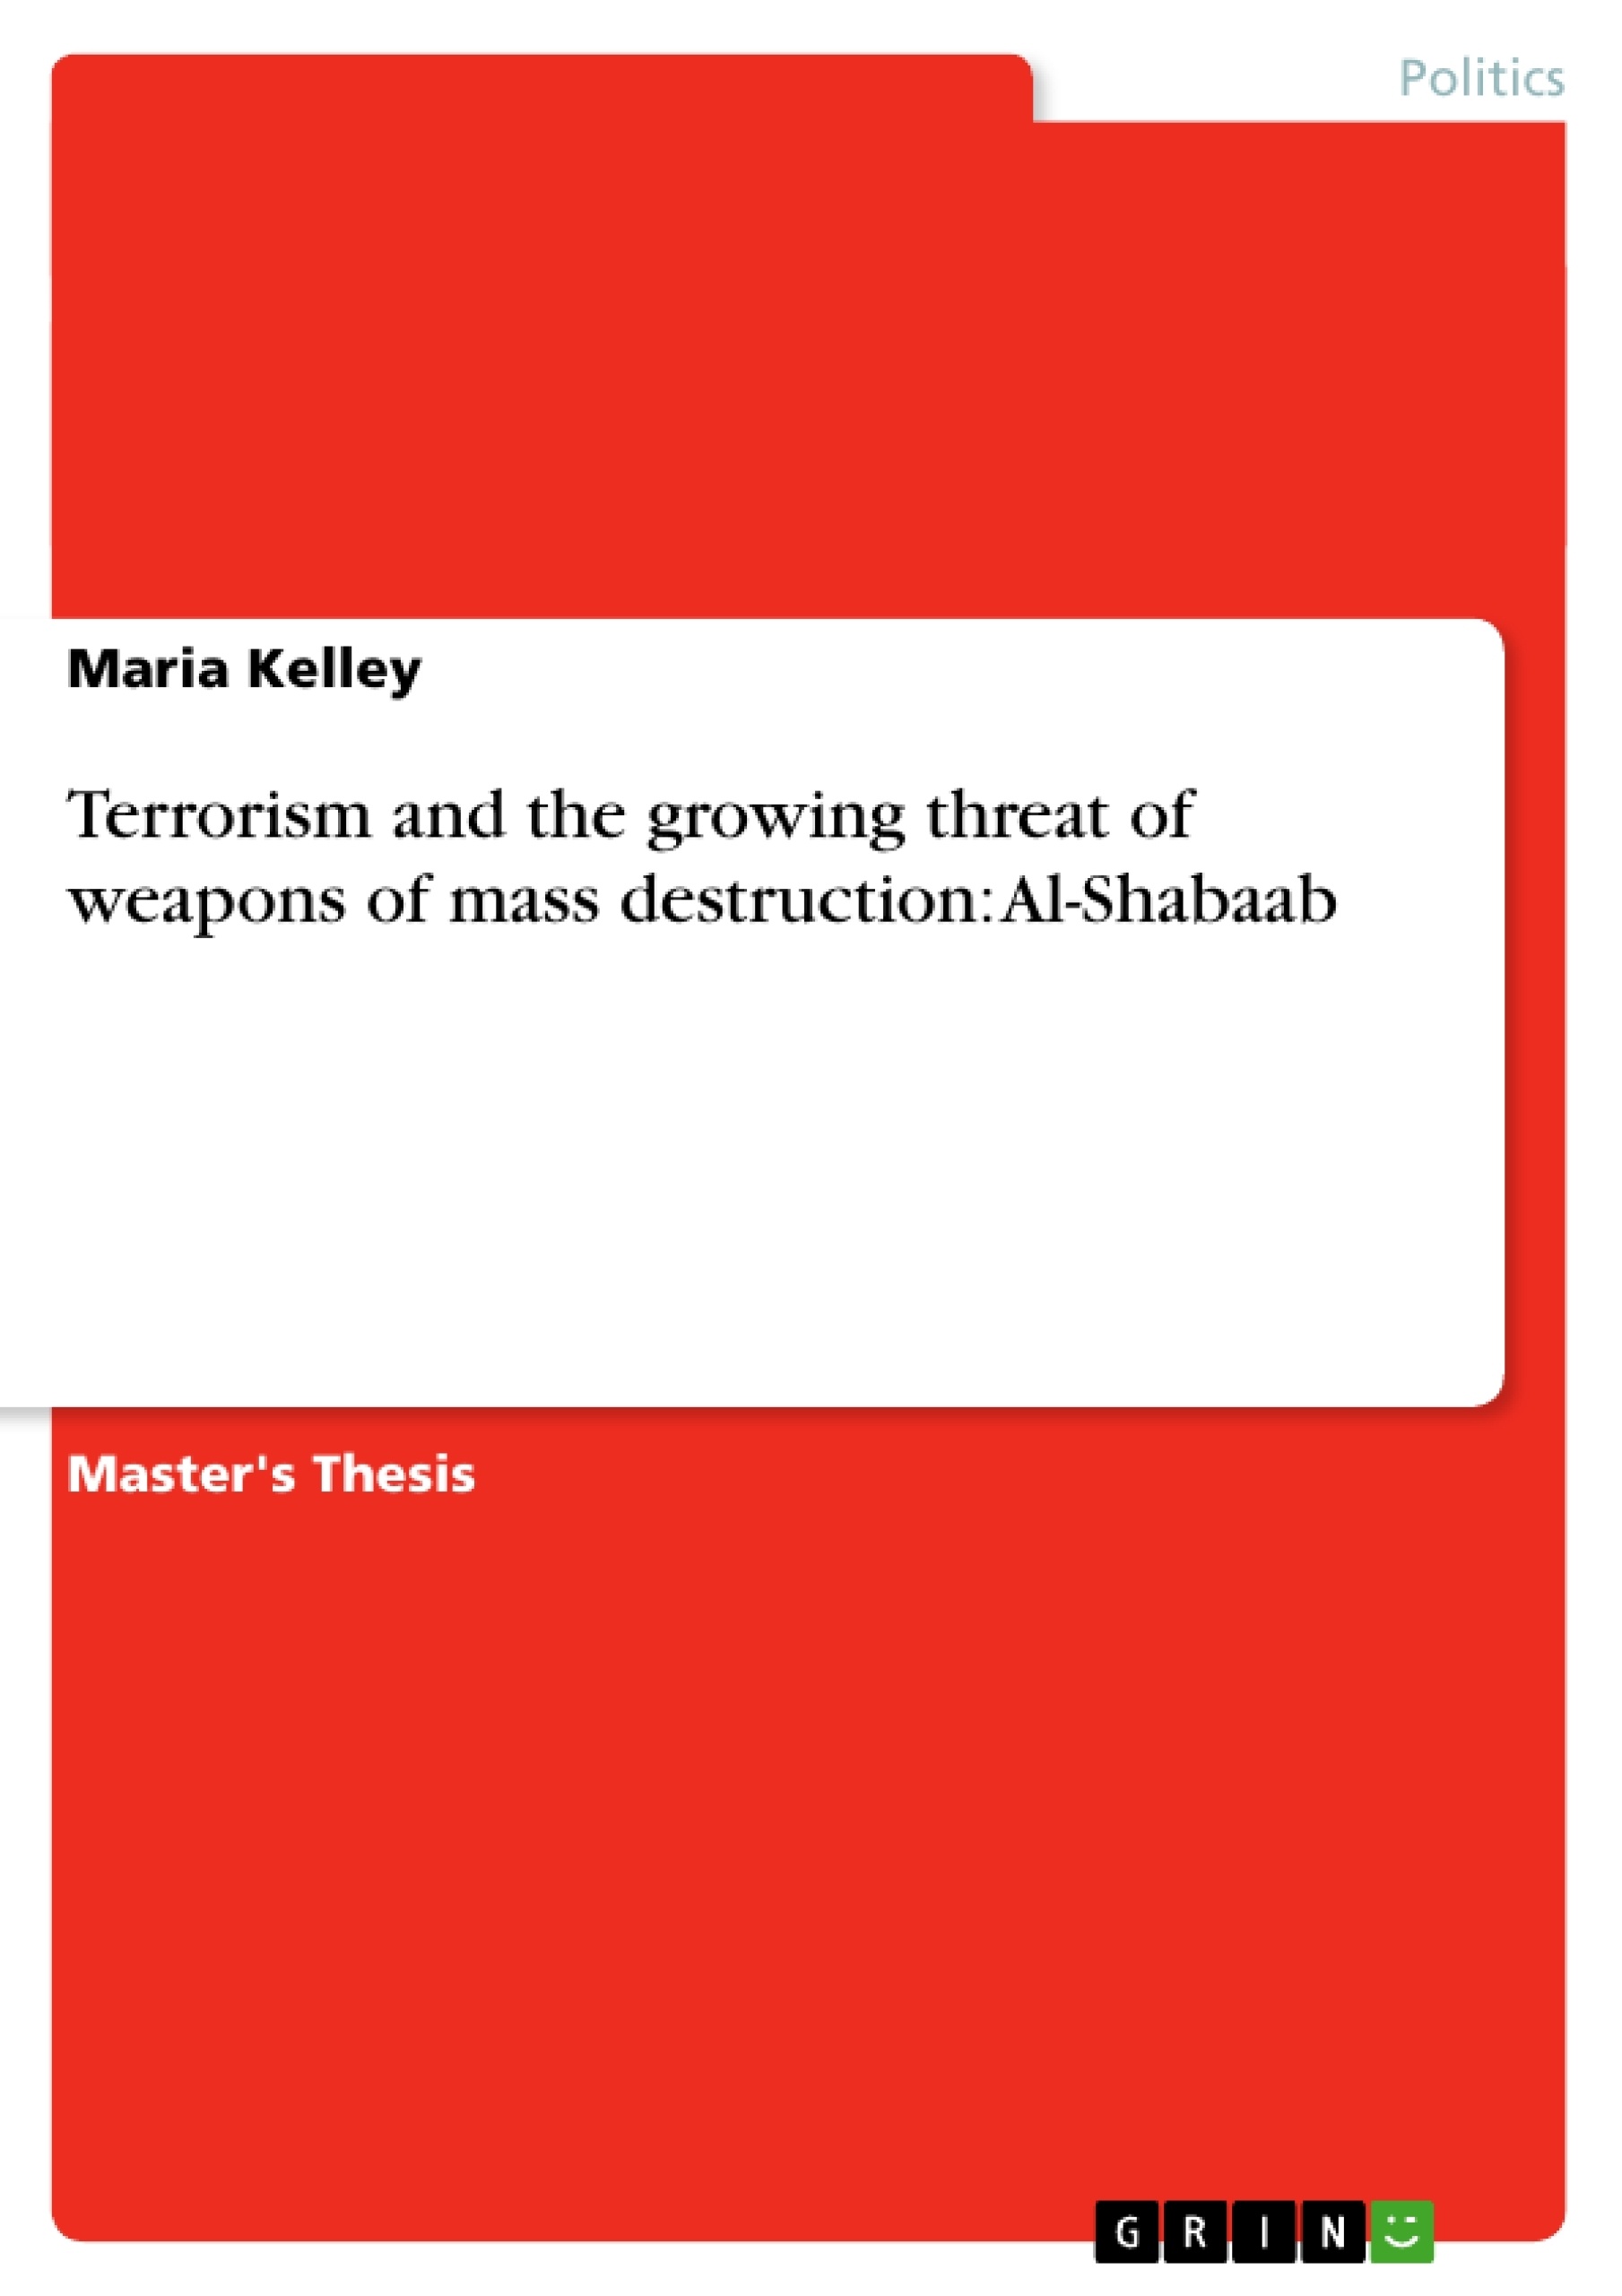 Titre: Terrorism and the growing threat of weapons of mass destruction: Al-Shabaab